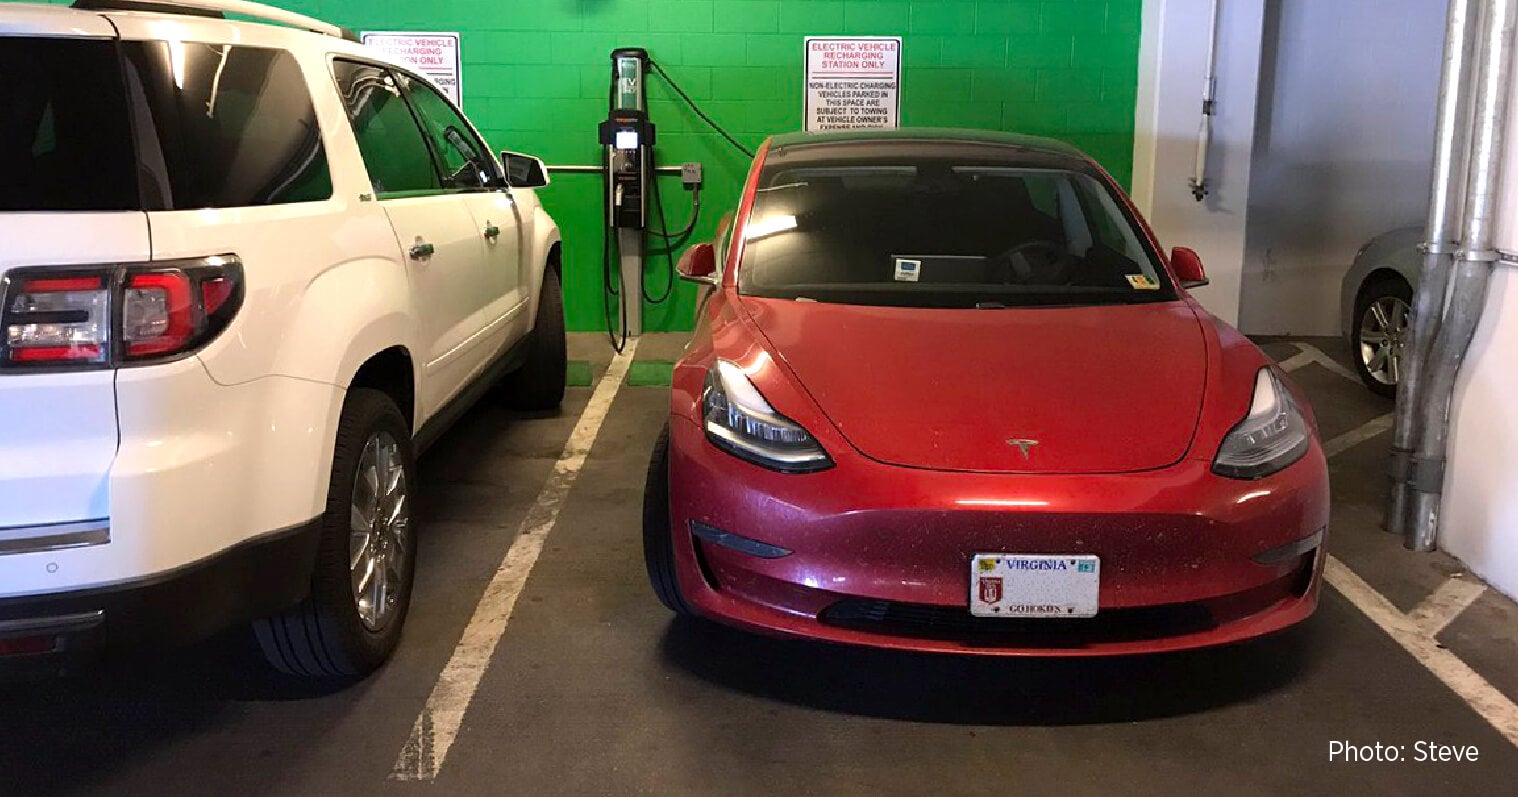 Epic Tesla Road Trip with ChargePoint